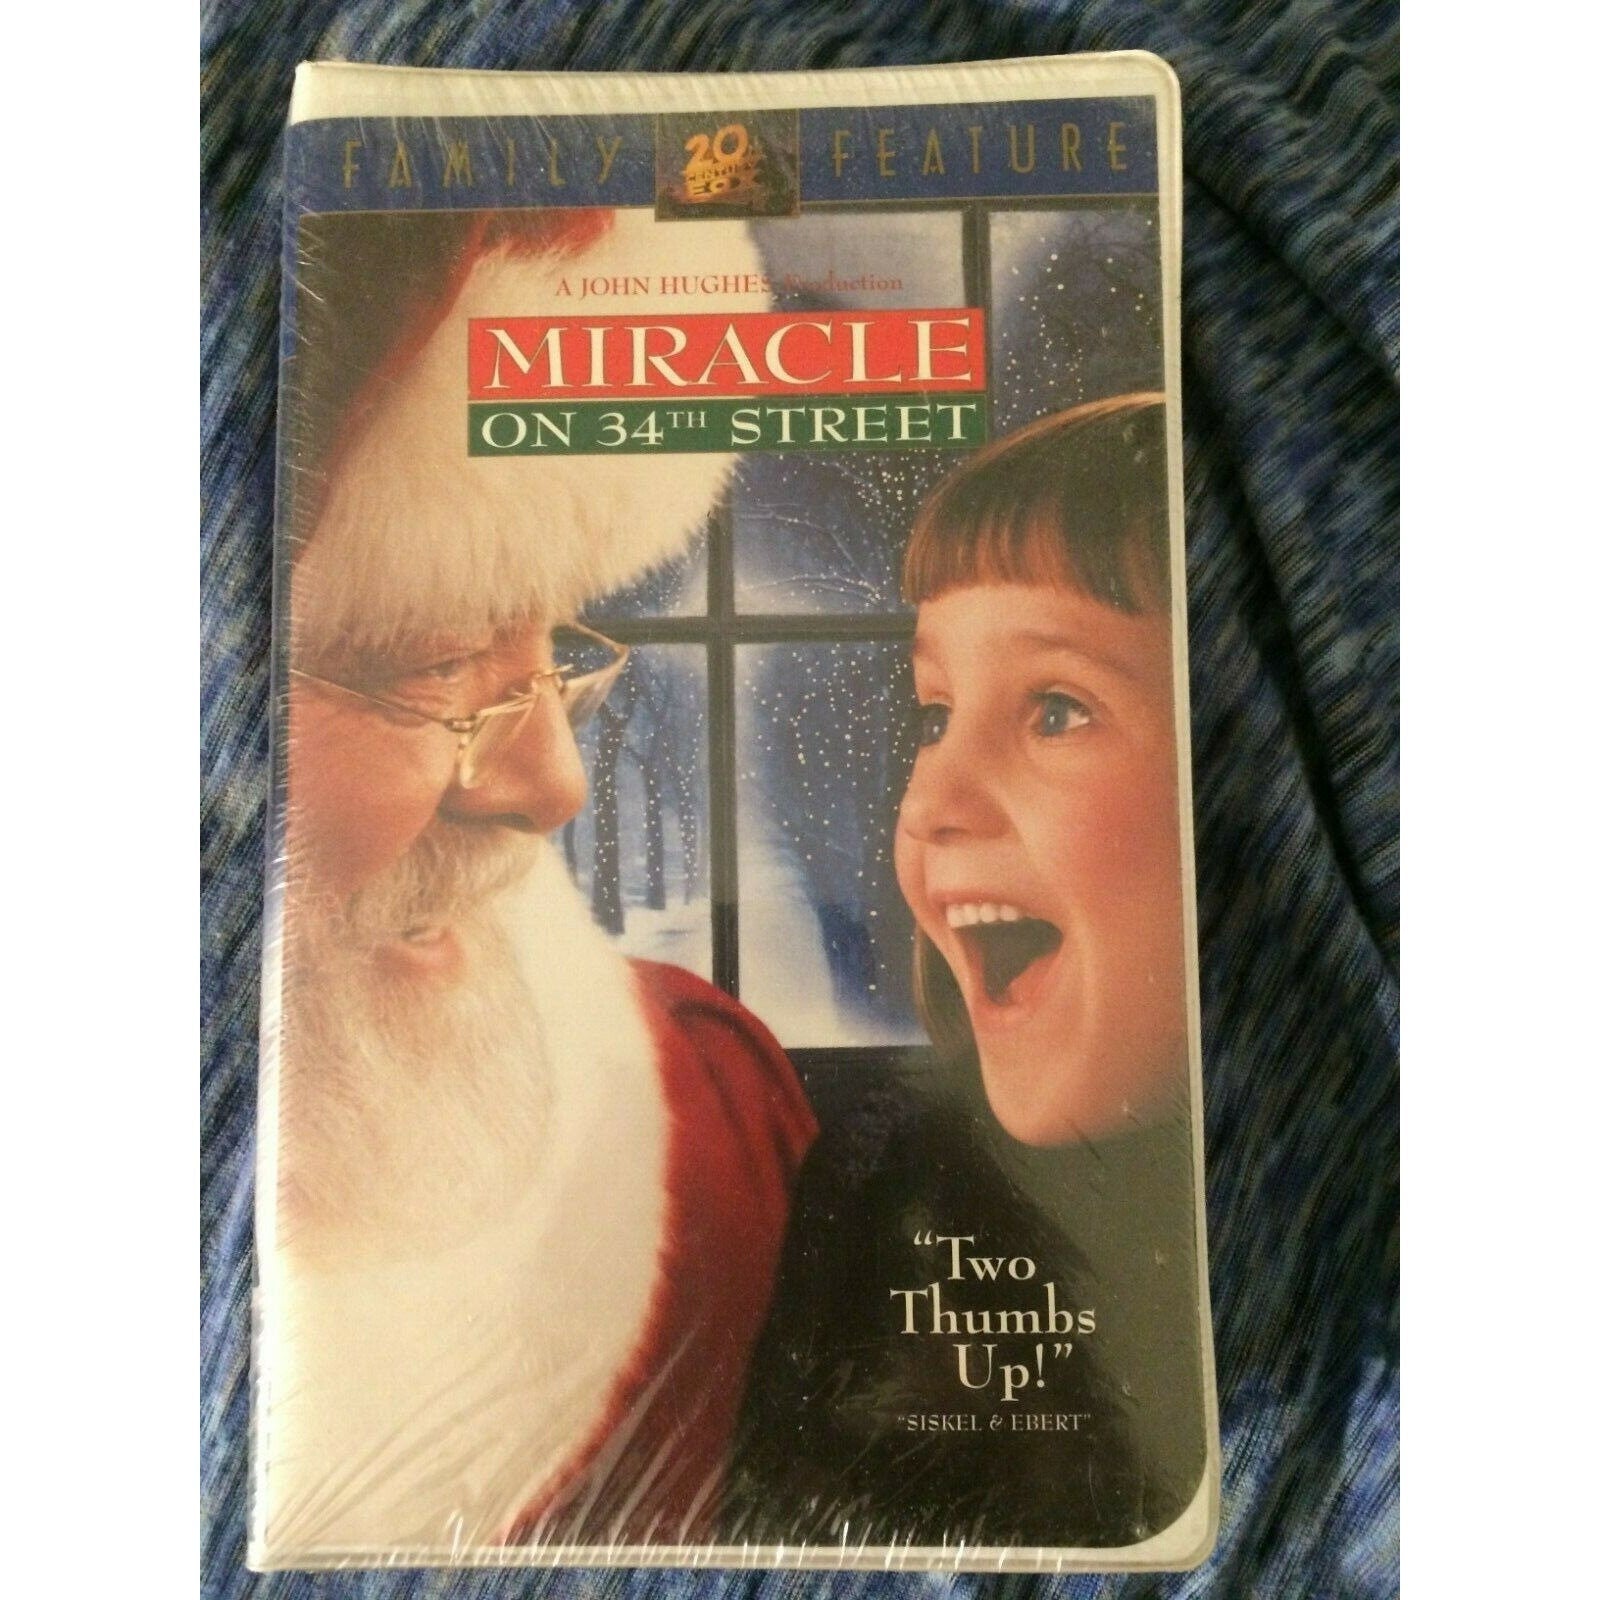 Miracle on 34th Street VHS Tape New Still Factory Sealed !!!!